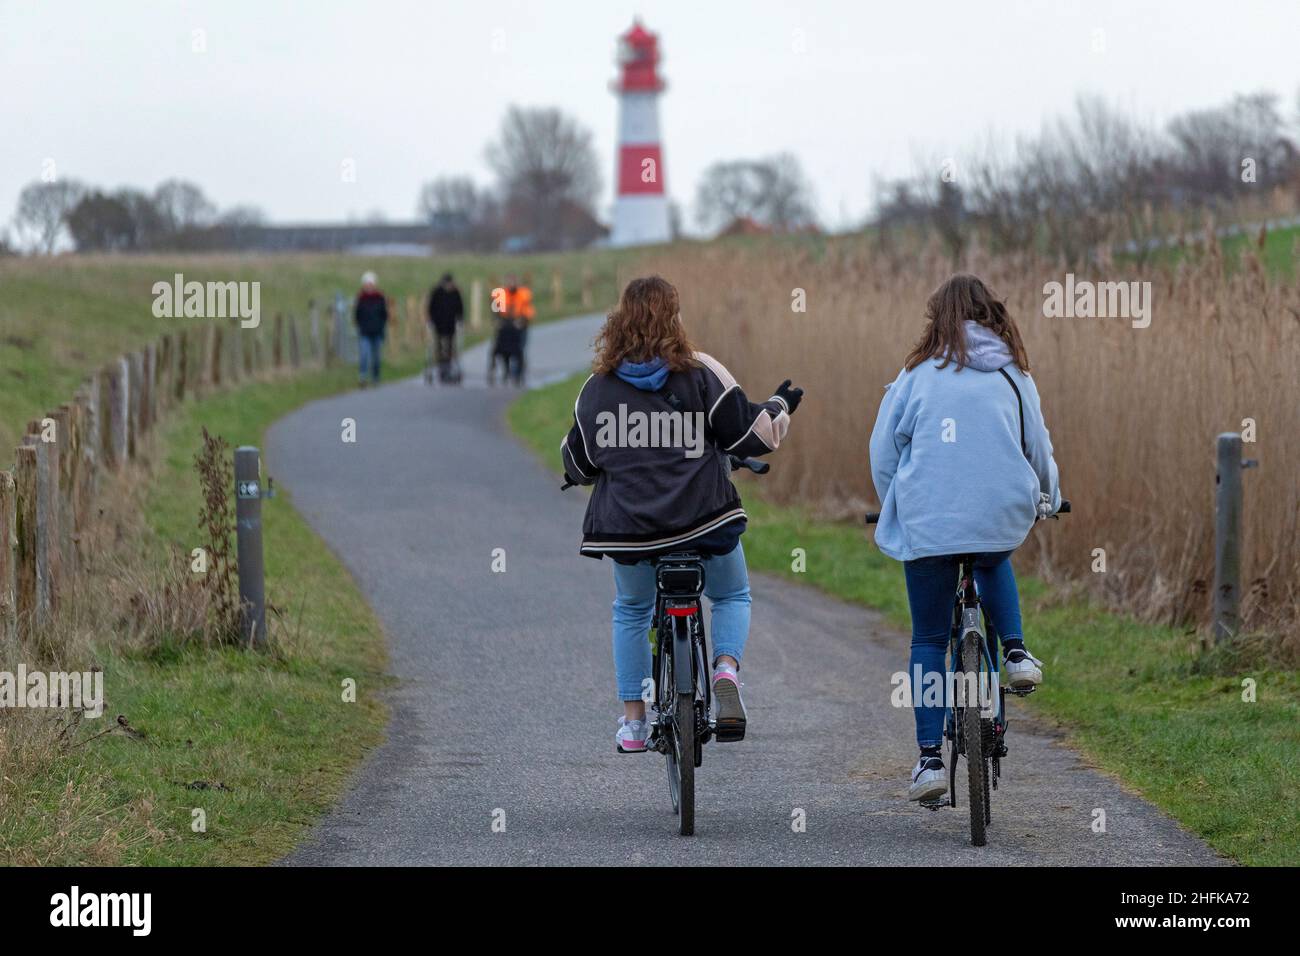 People cycling and walking, Falshöft, Schleswig-Holstein, Germany Stock Photo